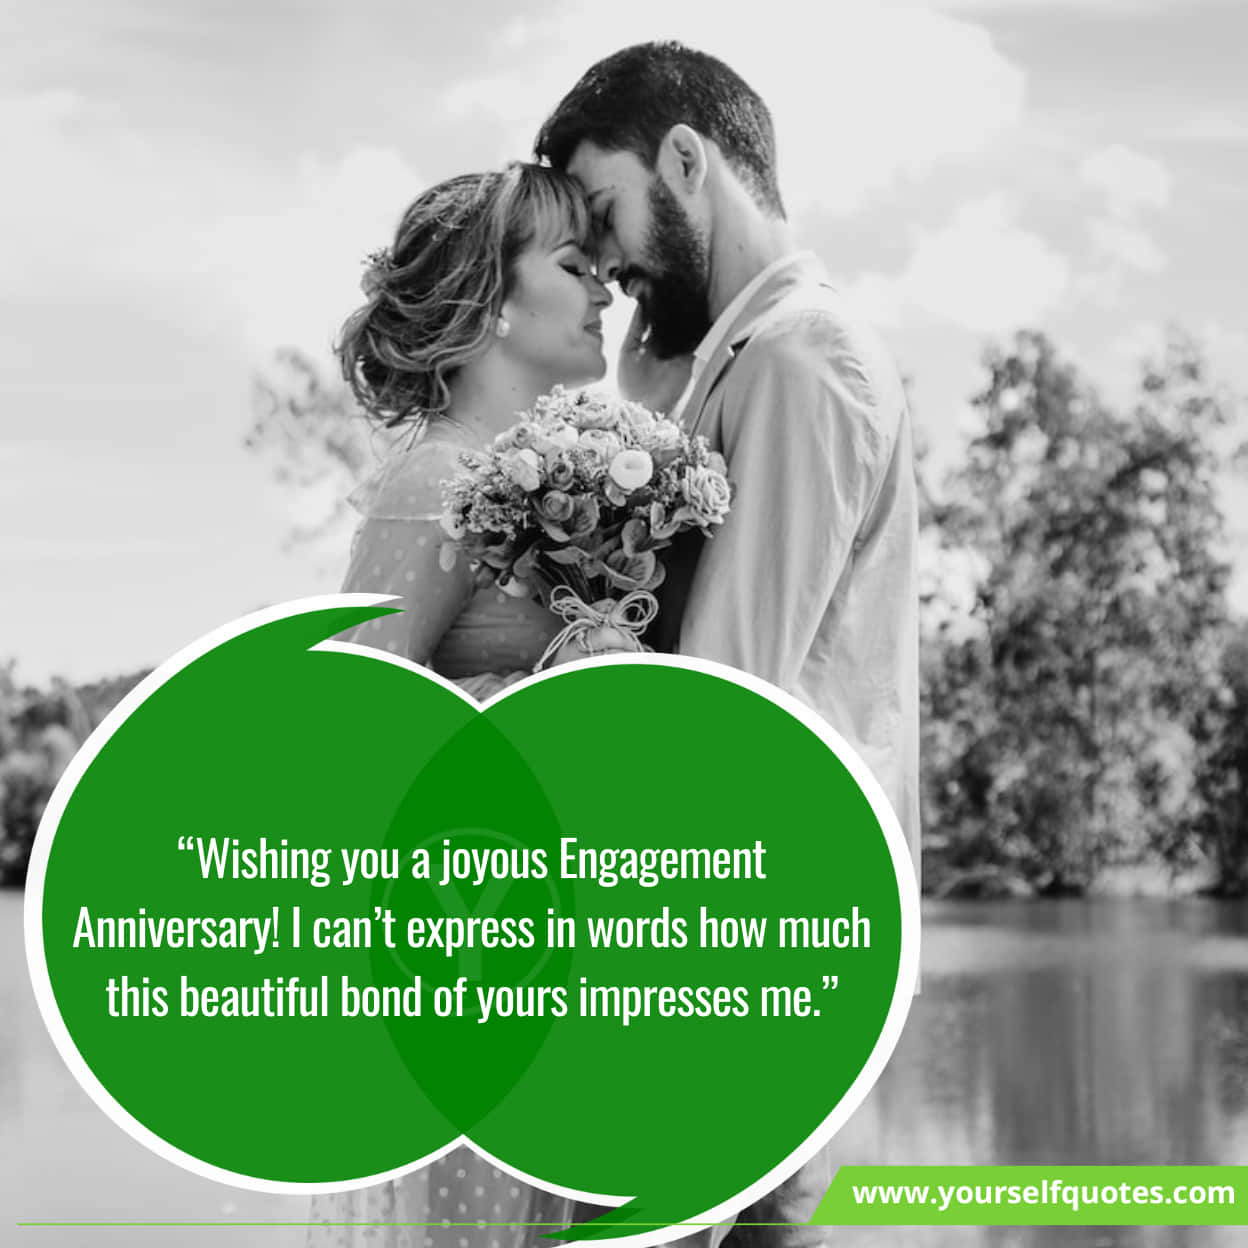 Engagement Anniversary Wishes for Husband | How to Wish Engagement